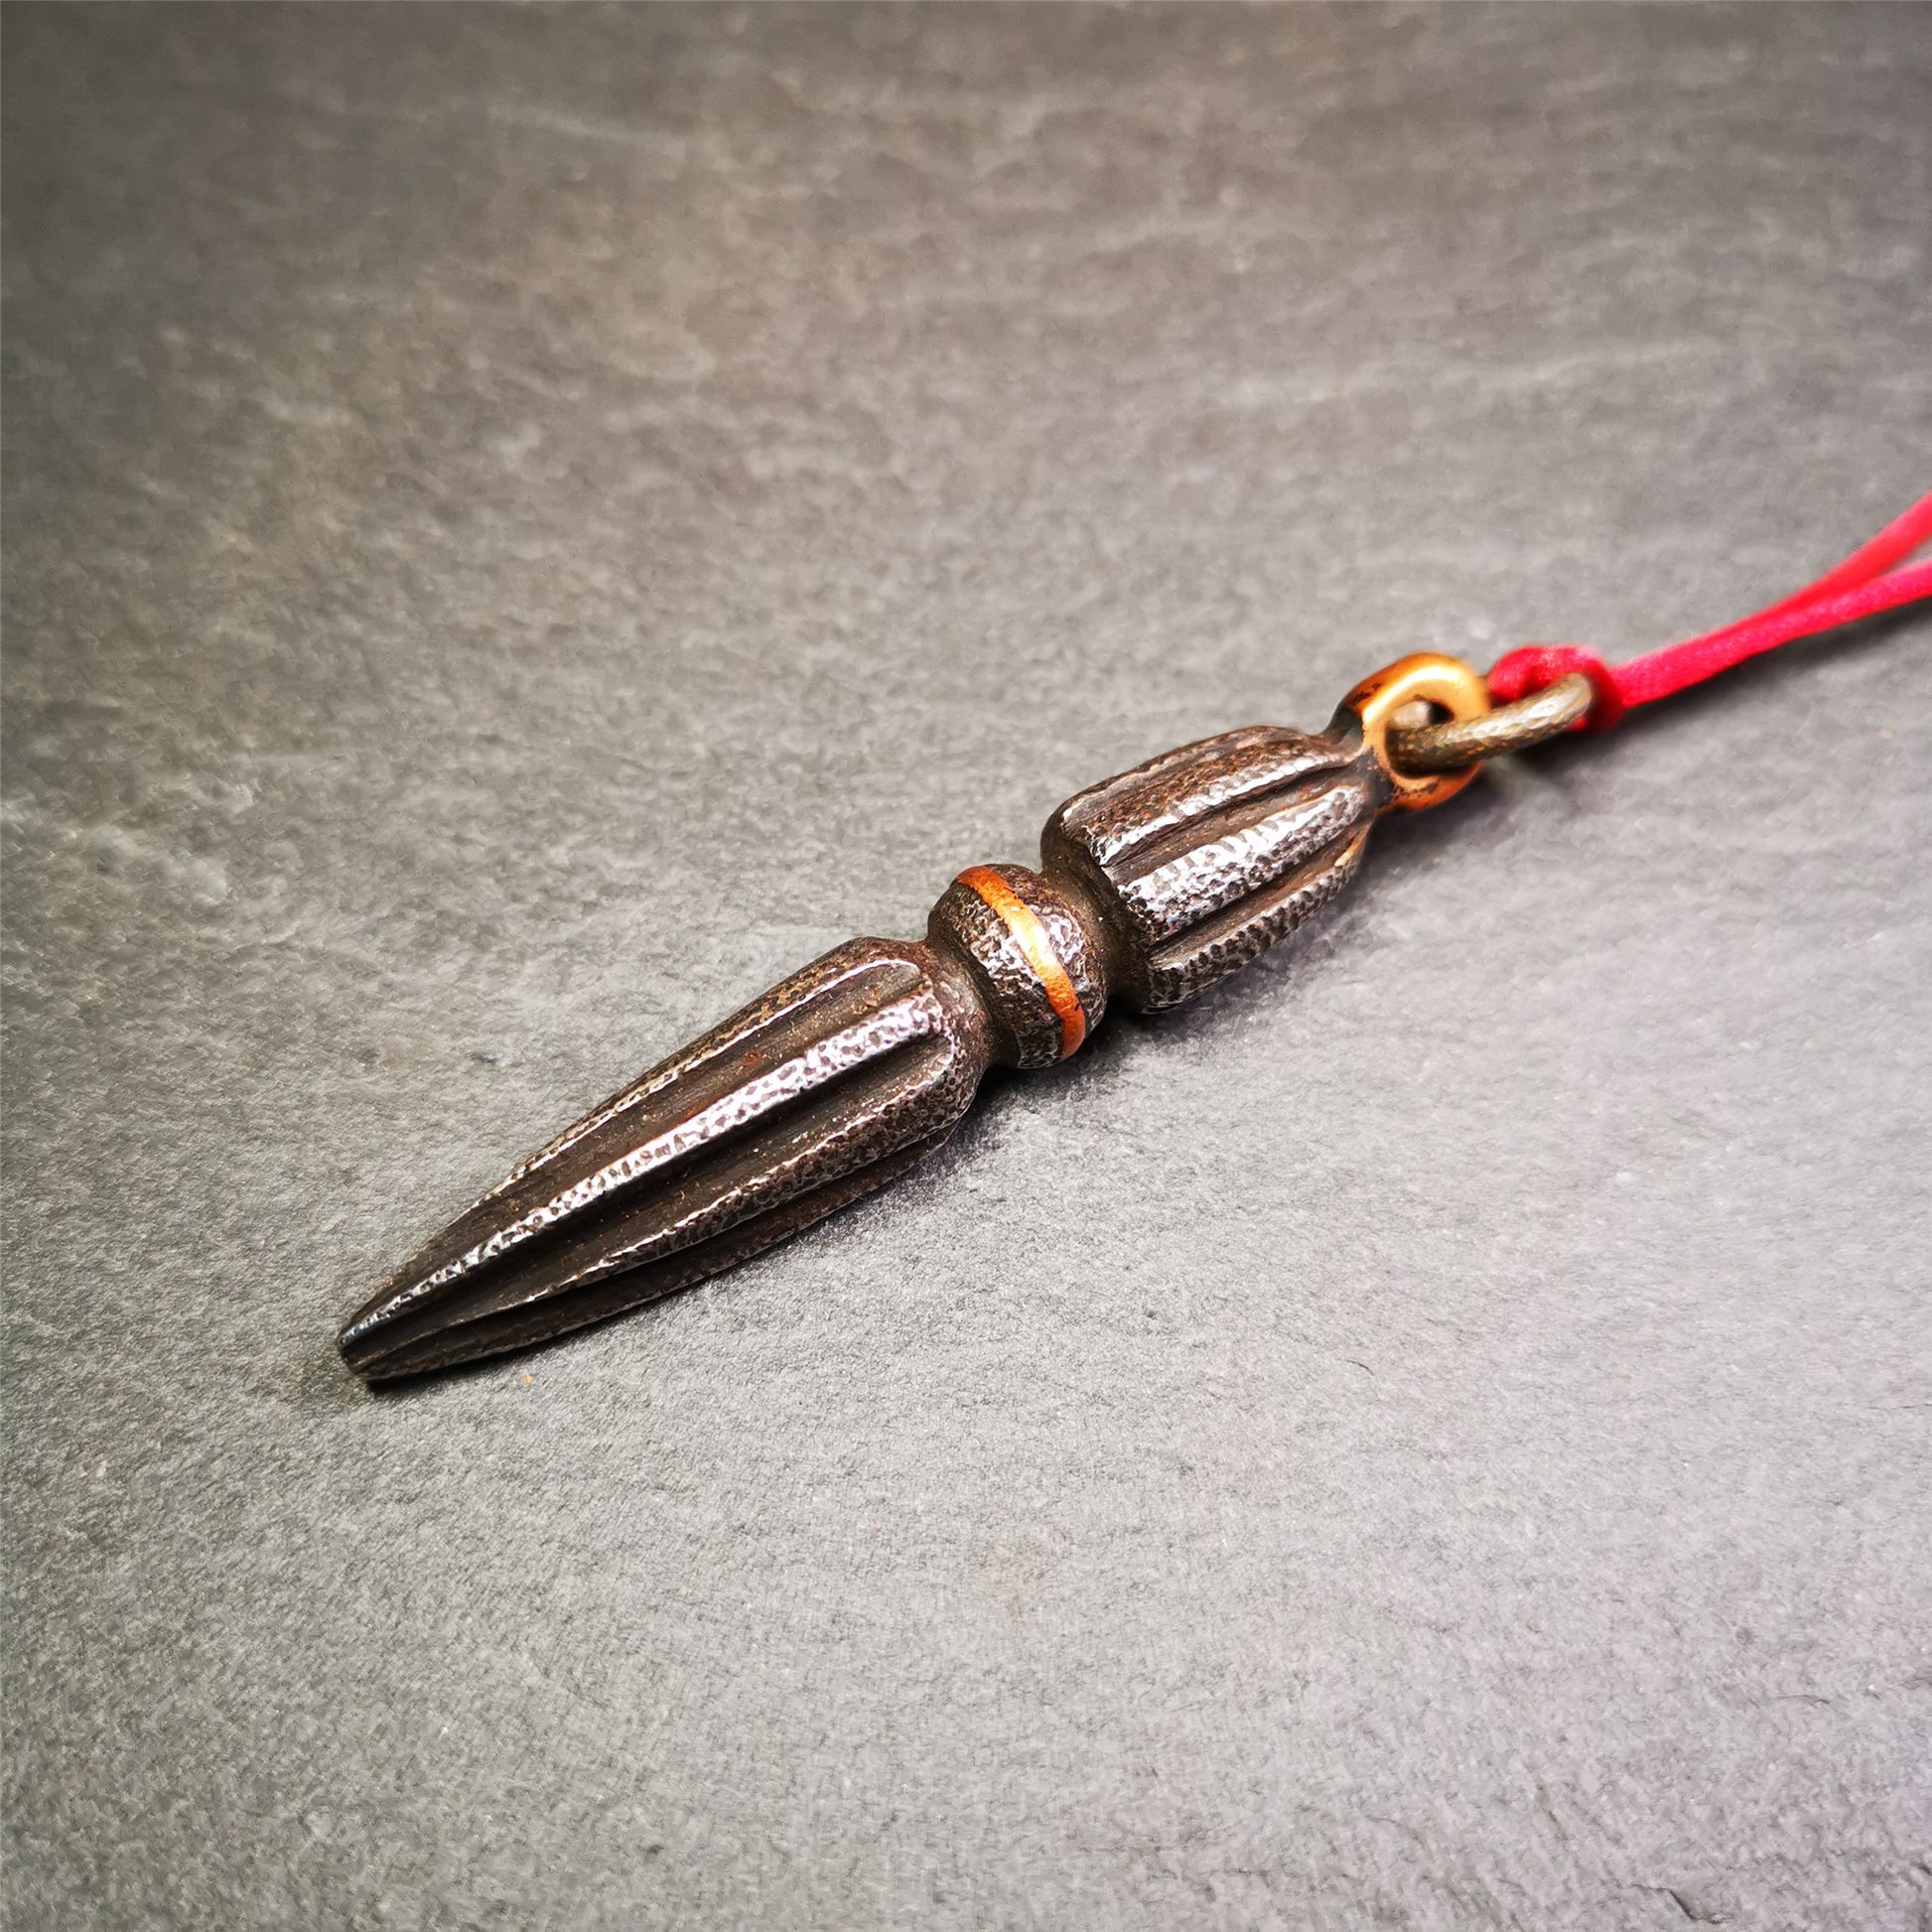 This handmade Dorje Phurba was crafted by Tibetan craftsmen from Hepo Town, Baiyu County, Tibet. The length is 2.5 inches,black color,the upper part is a vajra, and the lower part is a phurba. A copper wire is inlaid on the waist of the phurba.